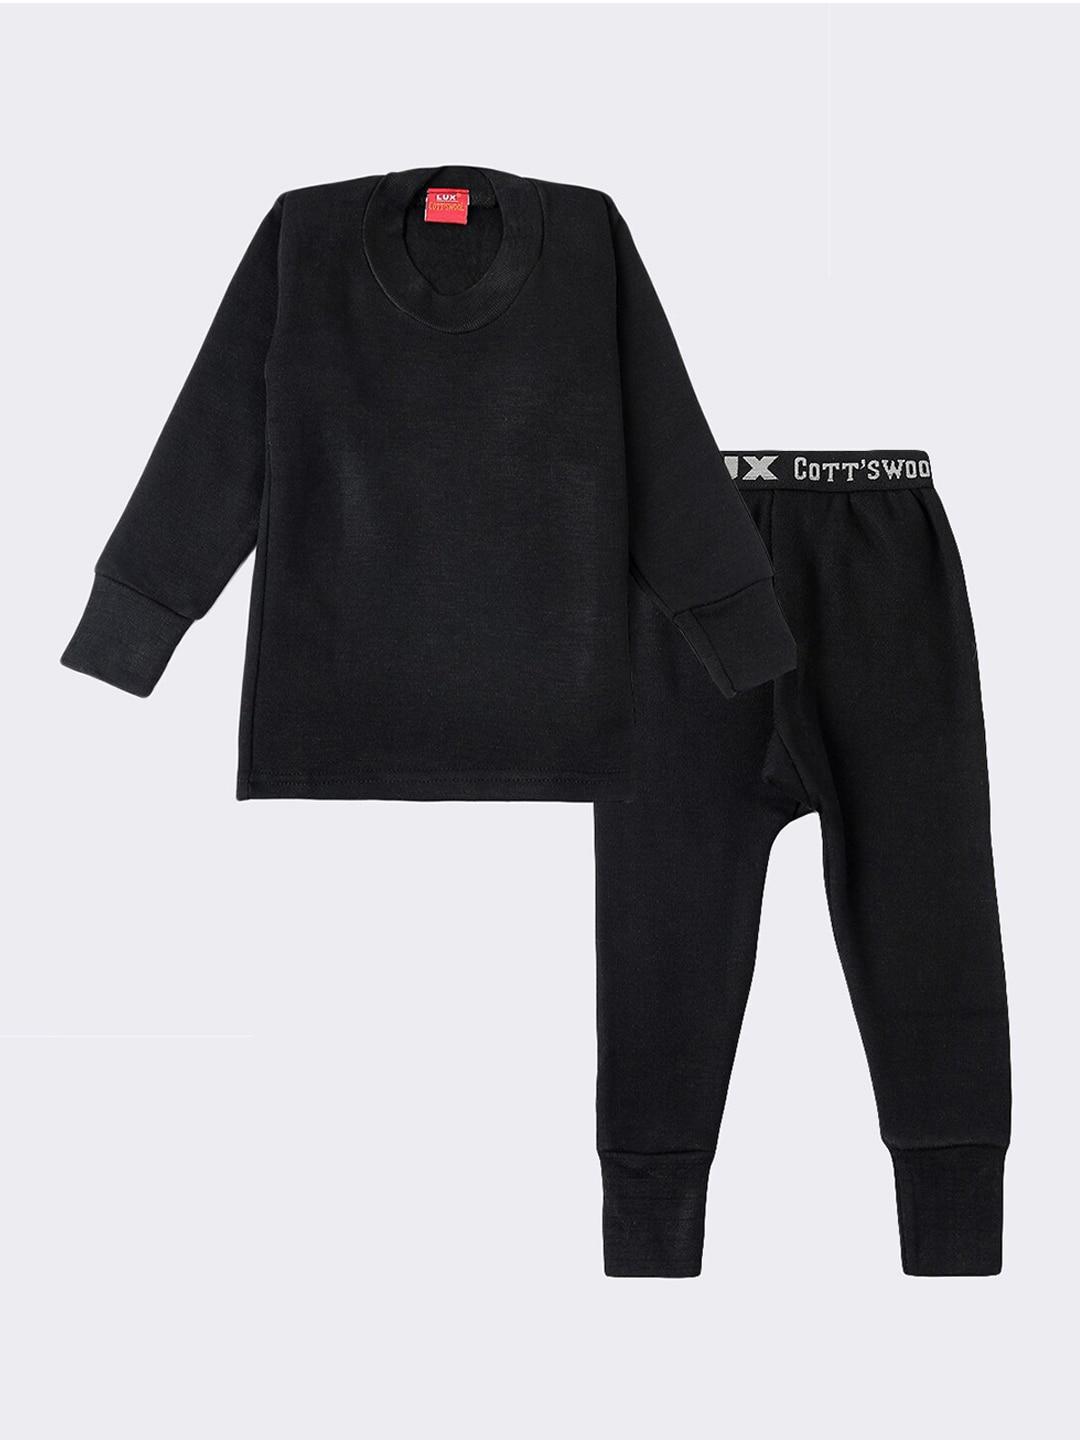 Lux Cottswool Boys Black Solid Cotton Thermal Set